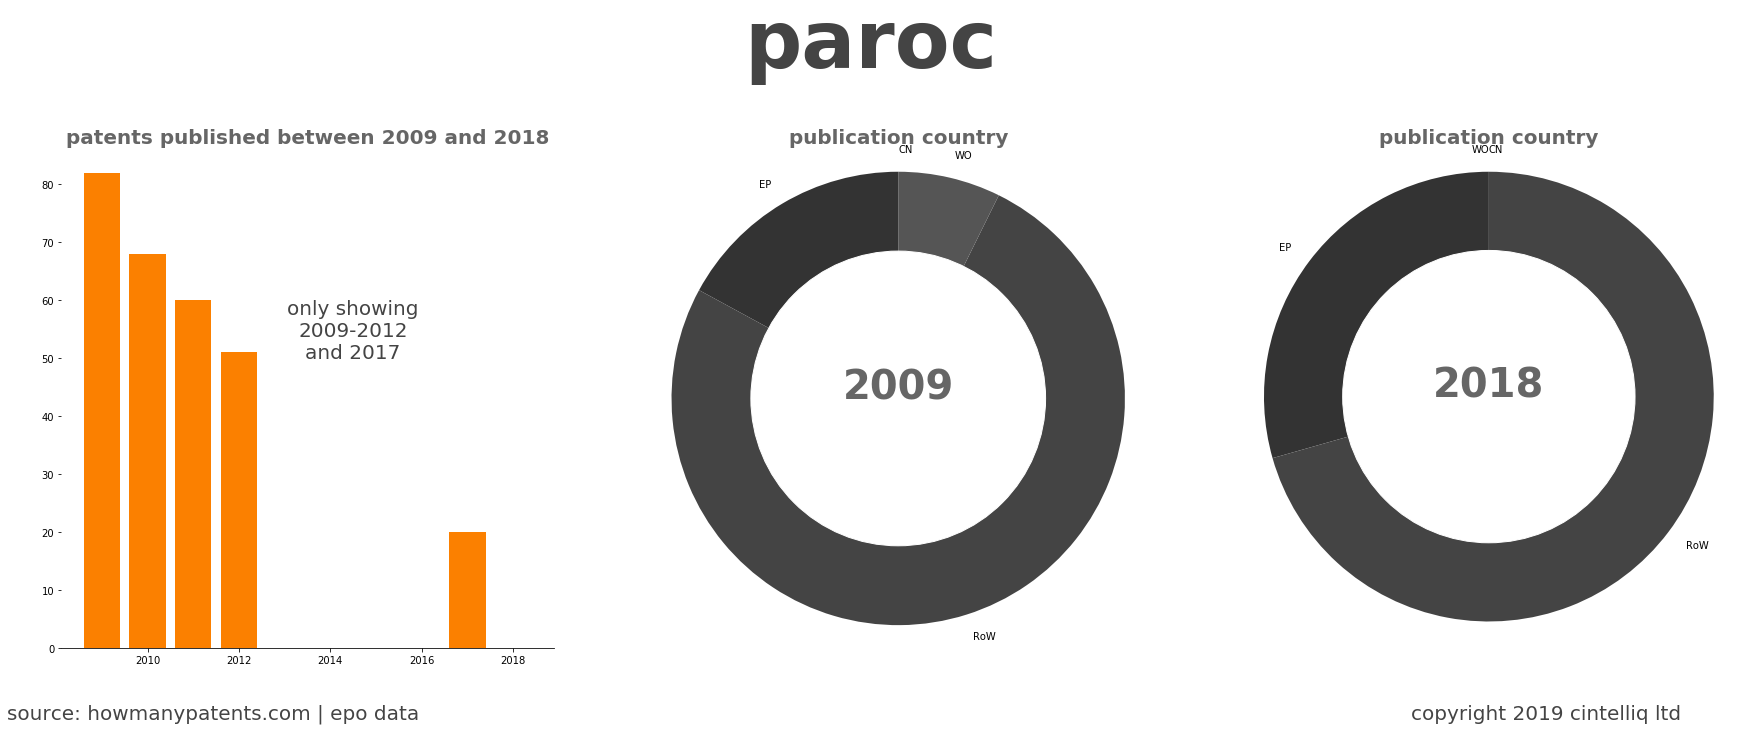 summary of patents for Paroc